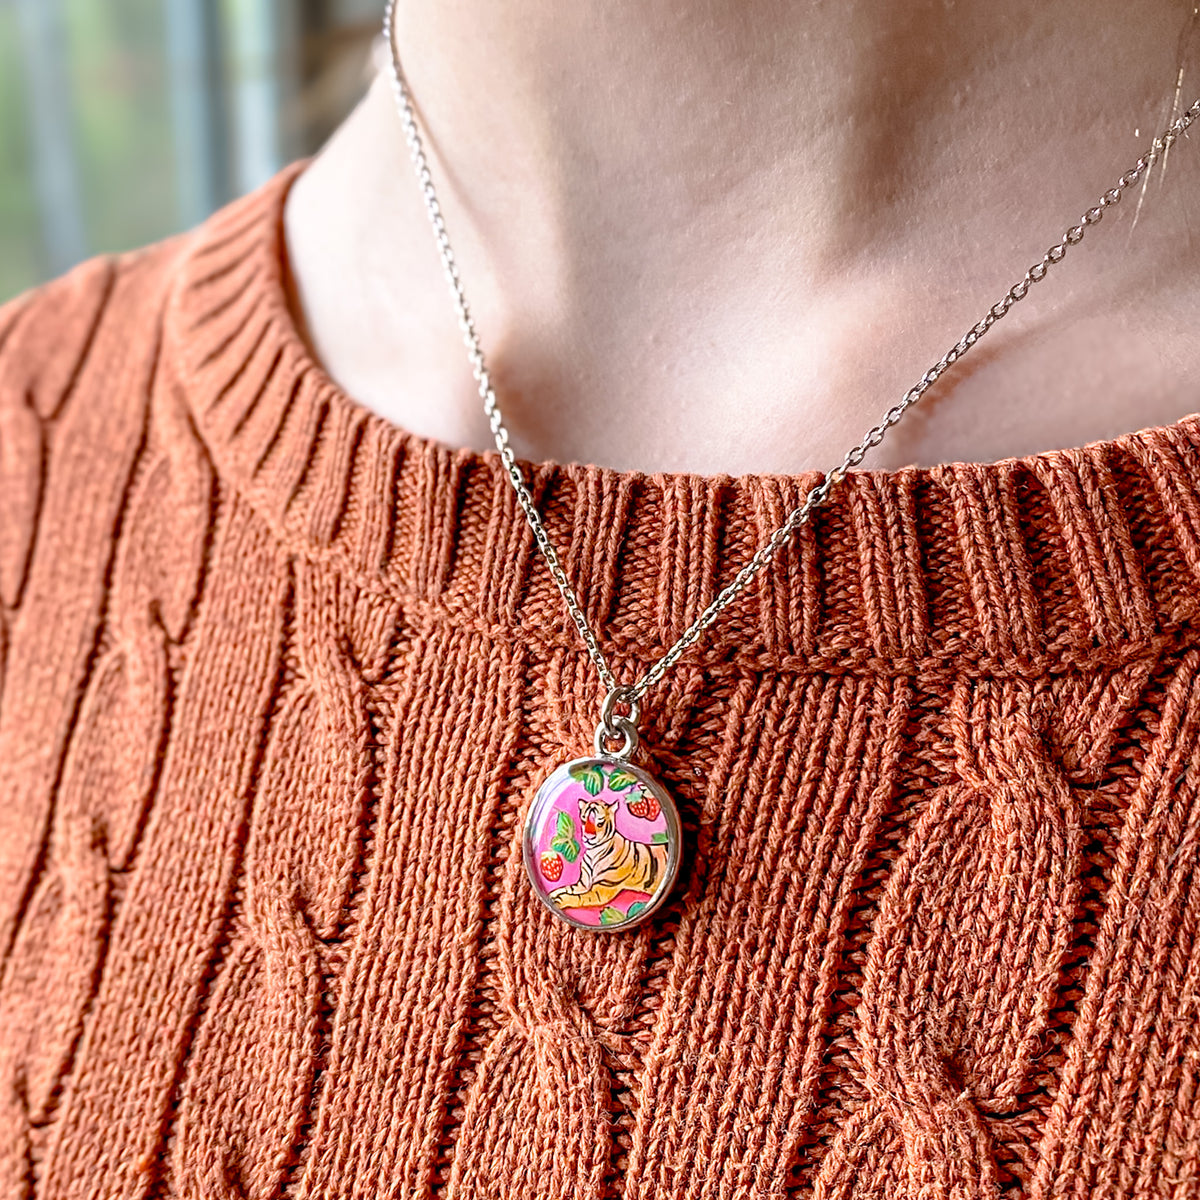 a close up of a person wearing a sweater and a necklace